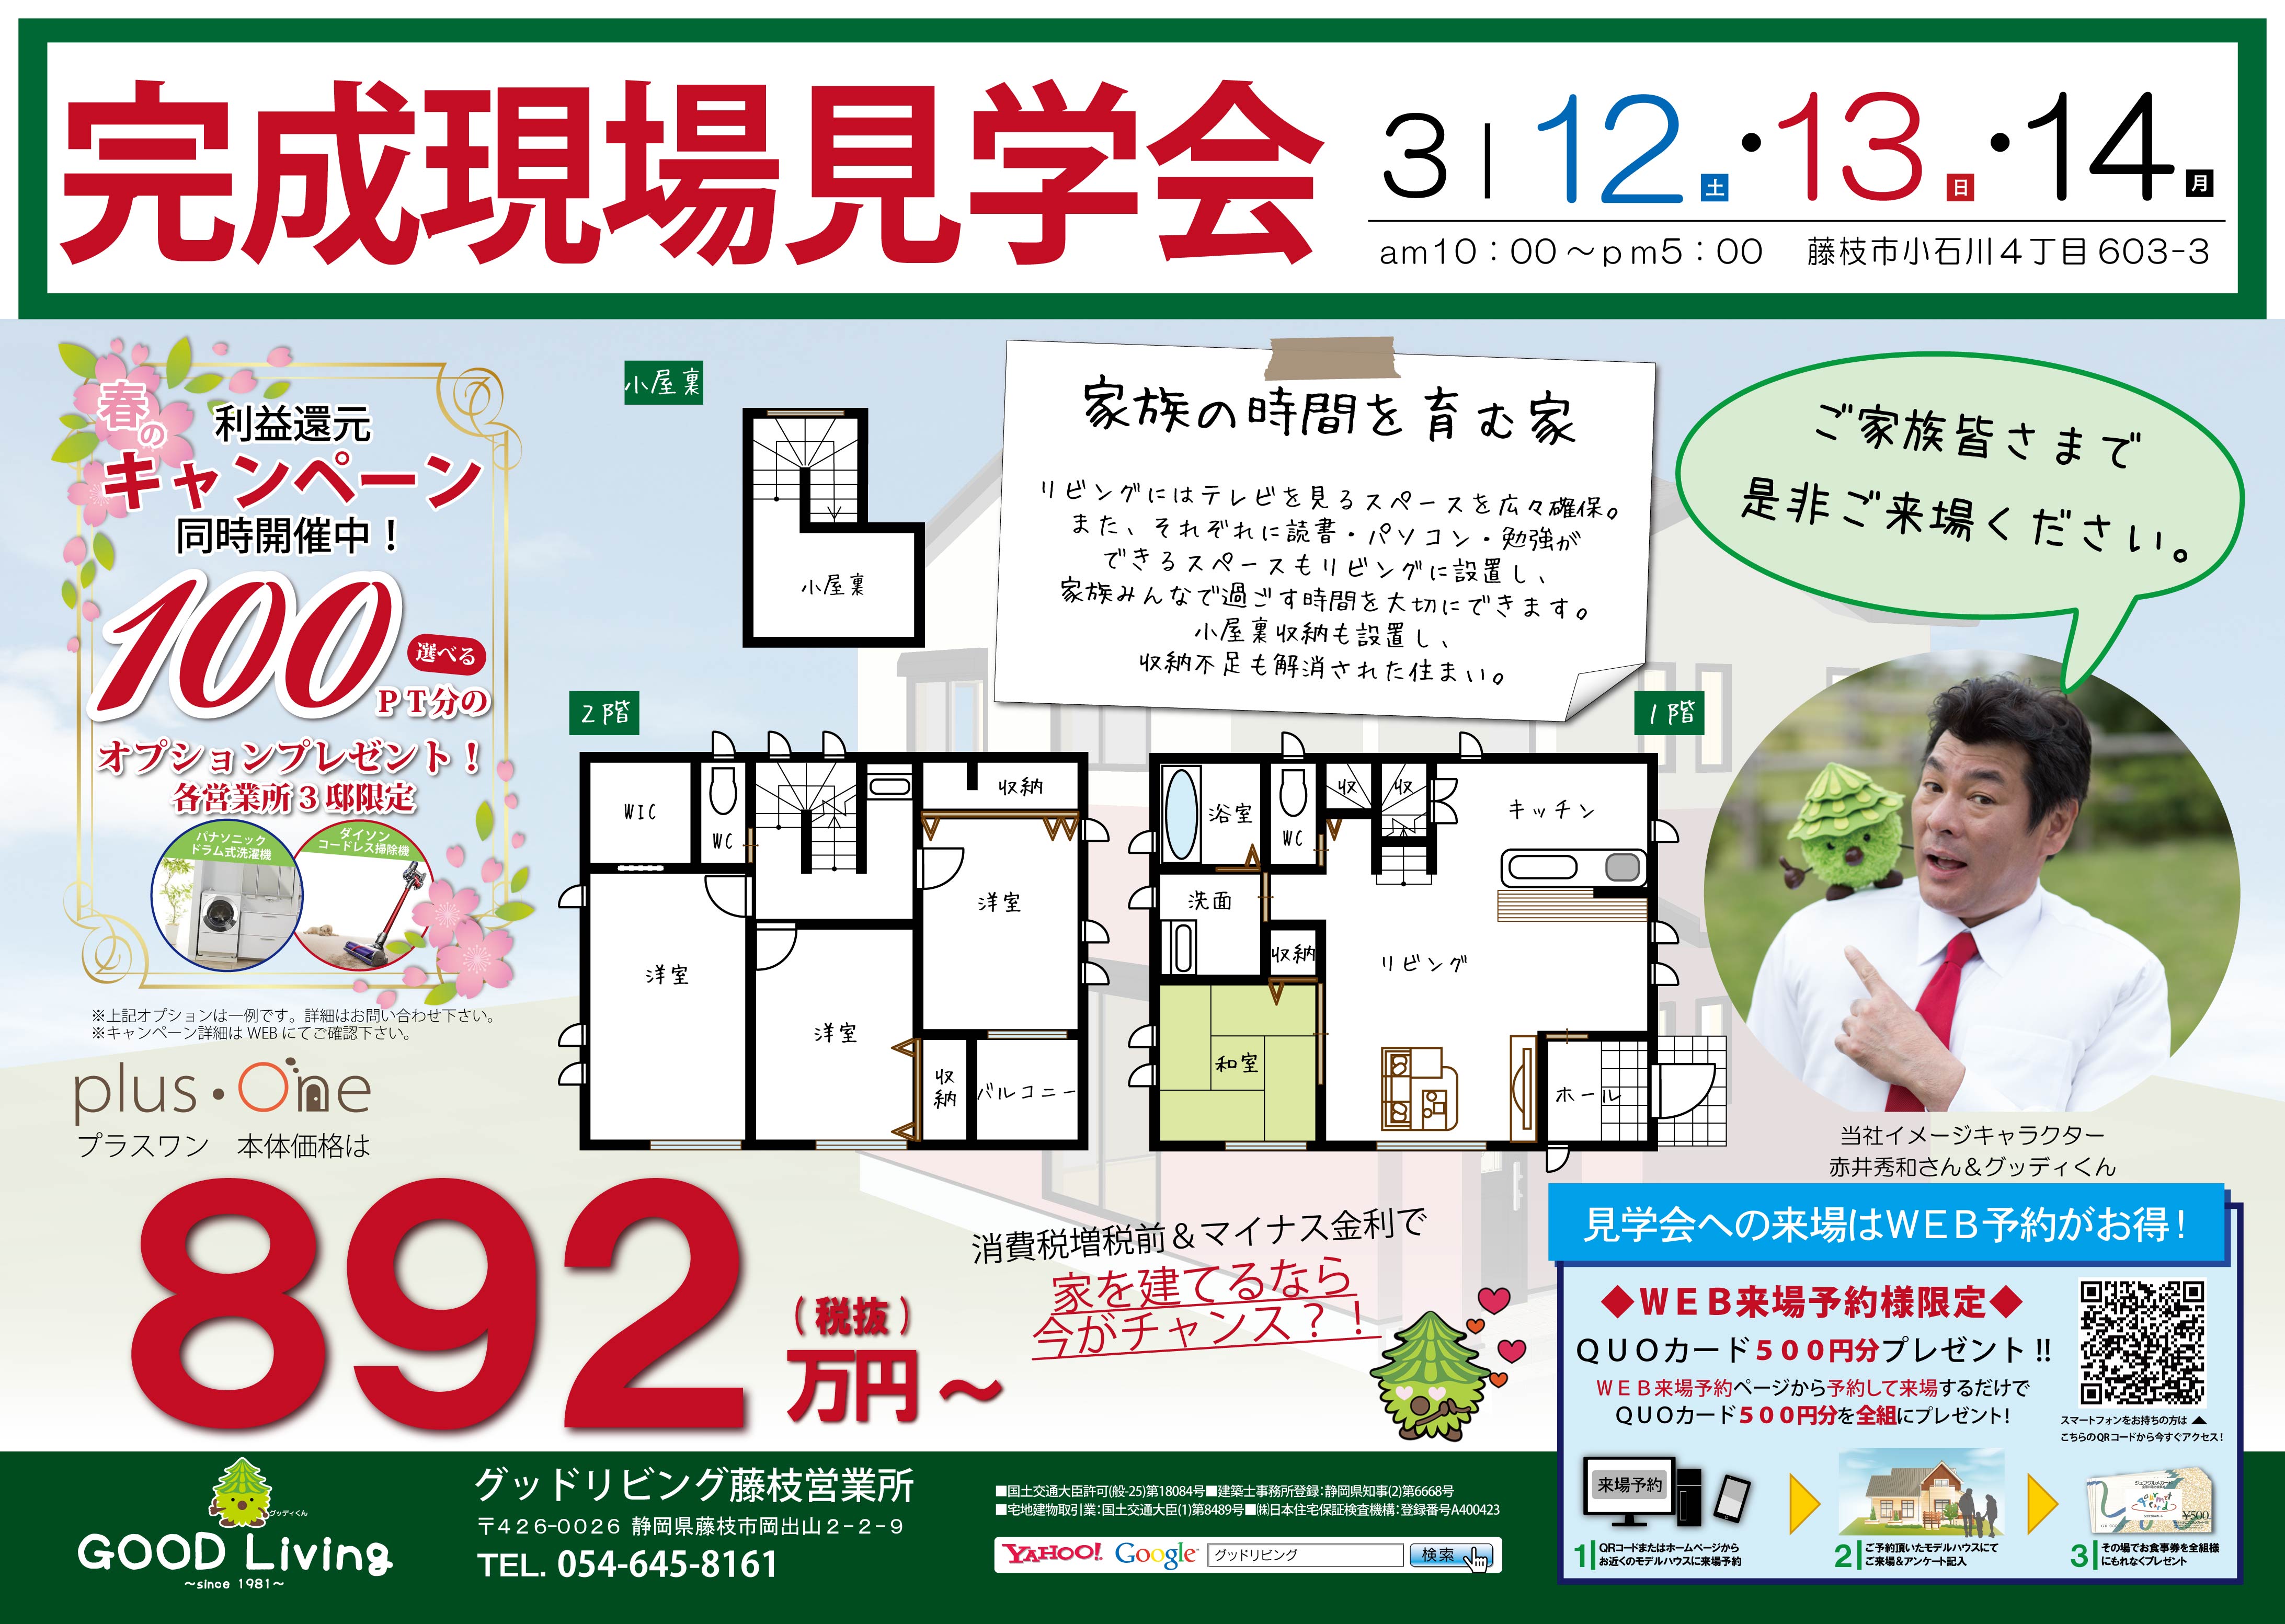 http://good-living.jp/event-information/pic/160319_%E7%9F%B3%E6%A7%98%E5%AE%8C%E6%88%90%E8%A6%8B%E5%AD%A6%E4%BC%9A-01.jpg